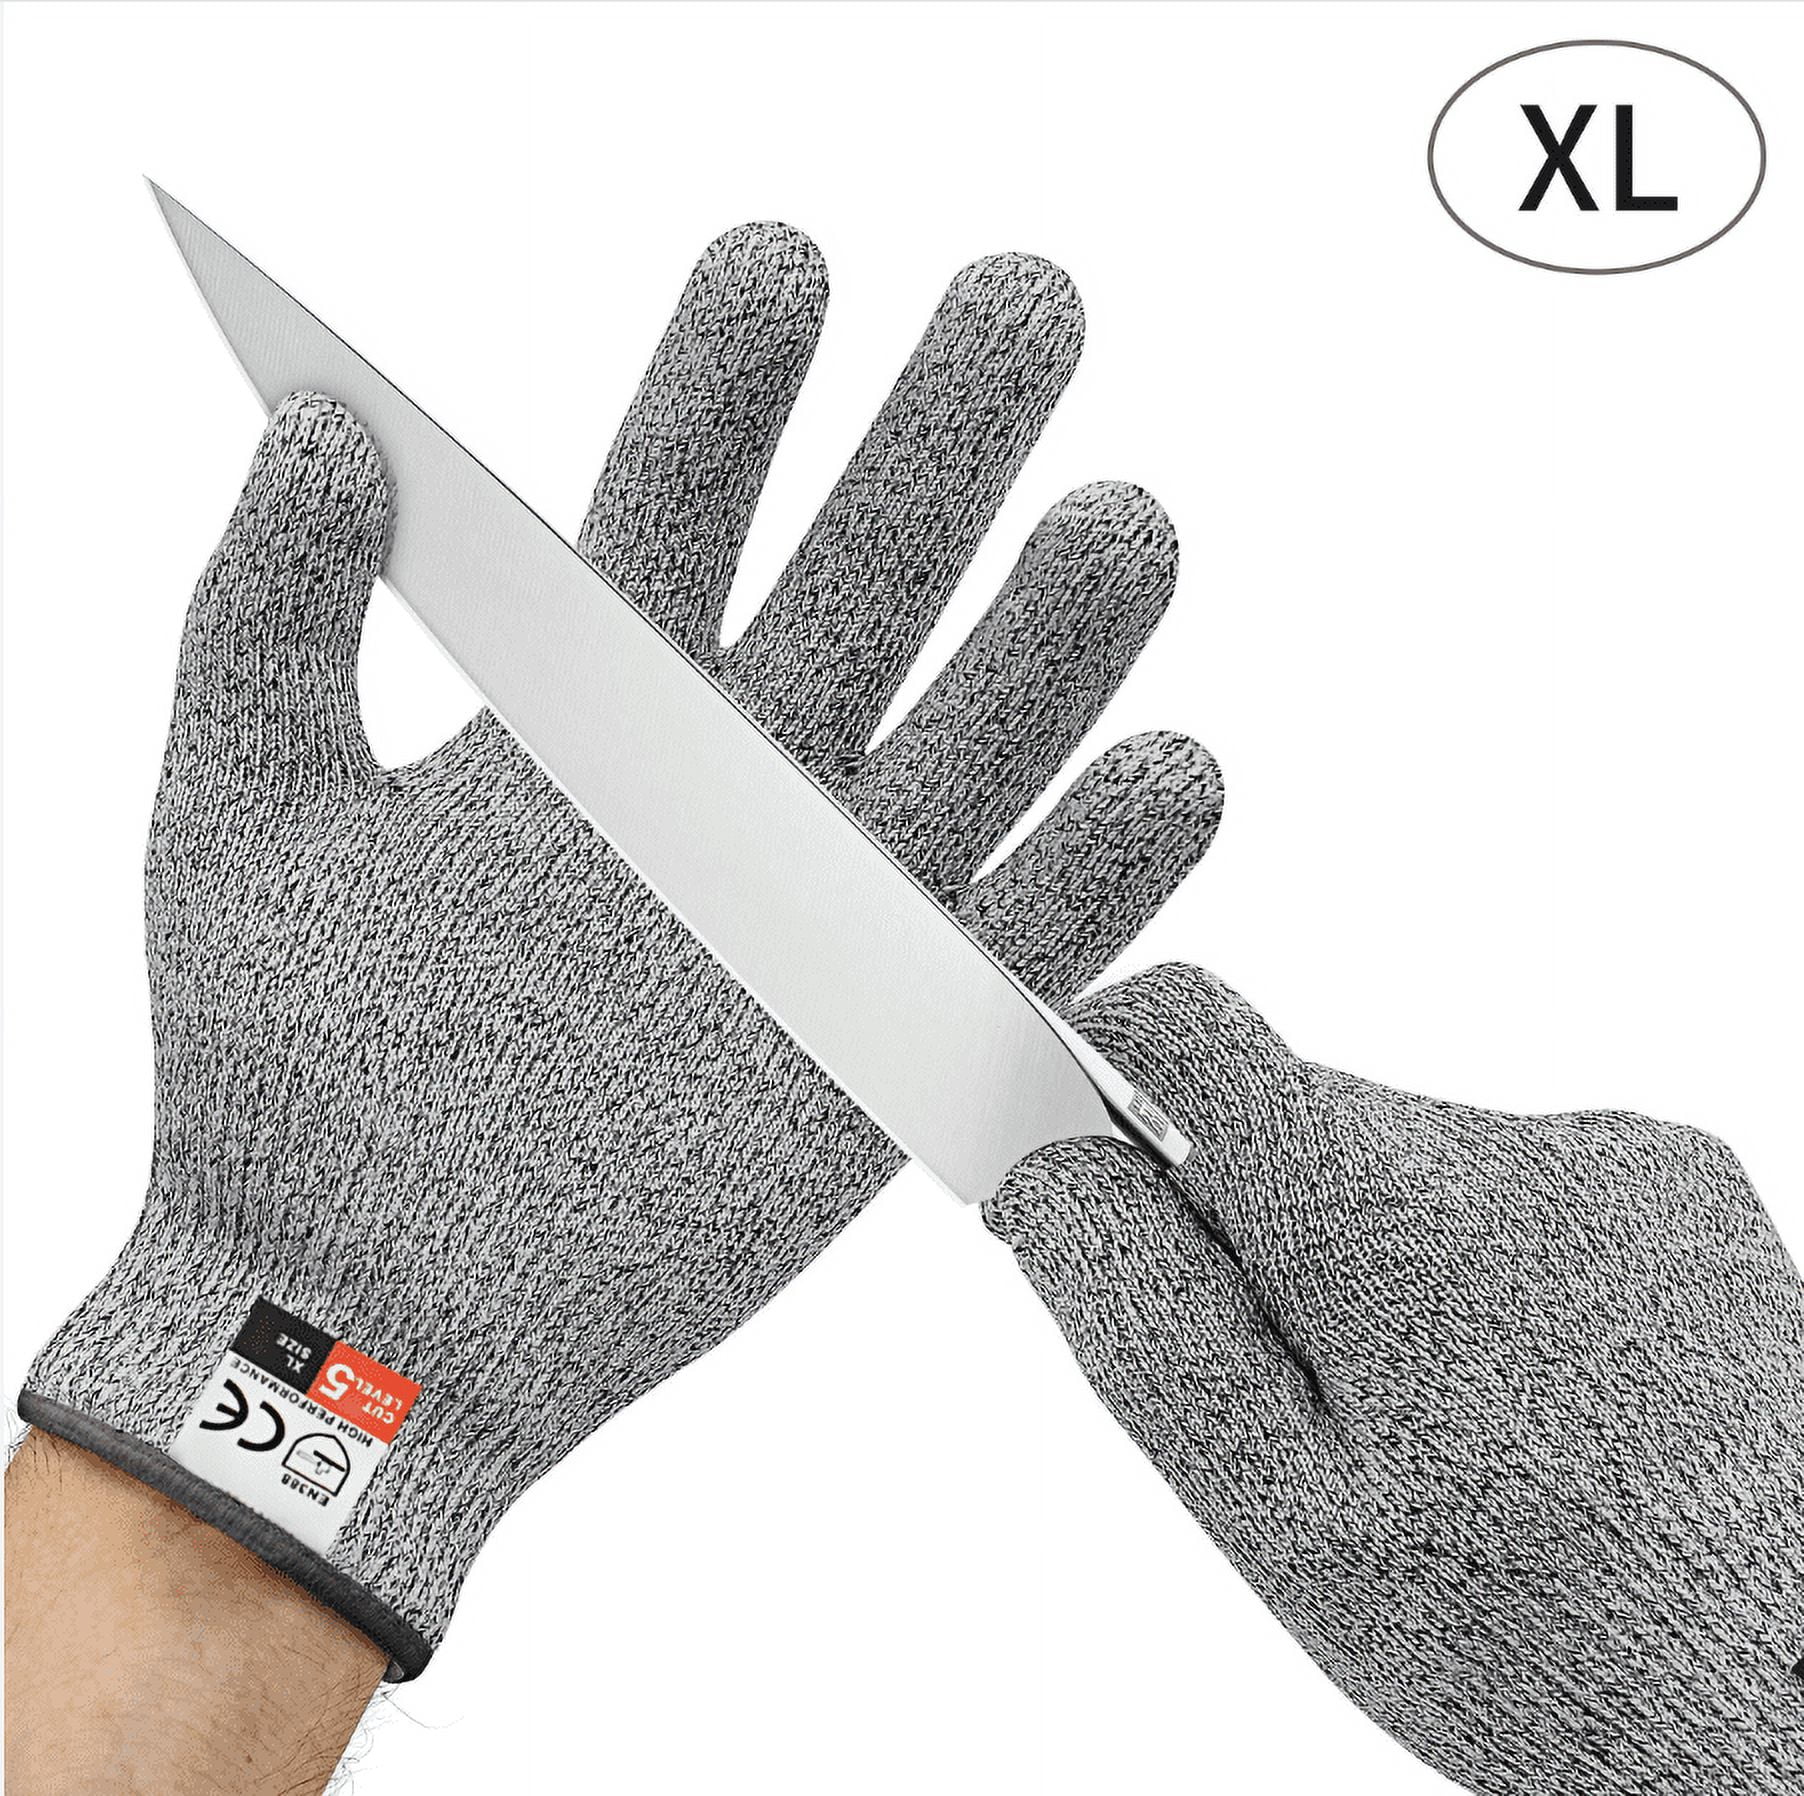 NoCry Cut Resistant Gloves Kitchen Large, TECBOX High Performance